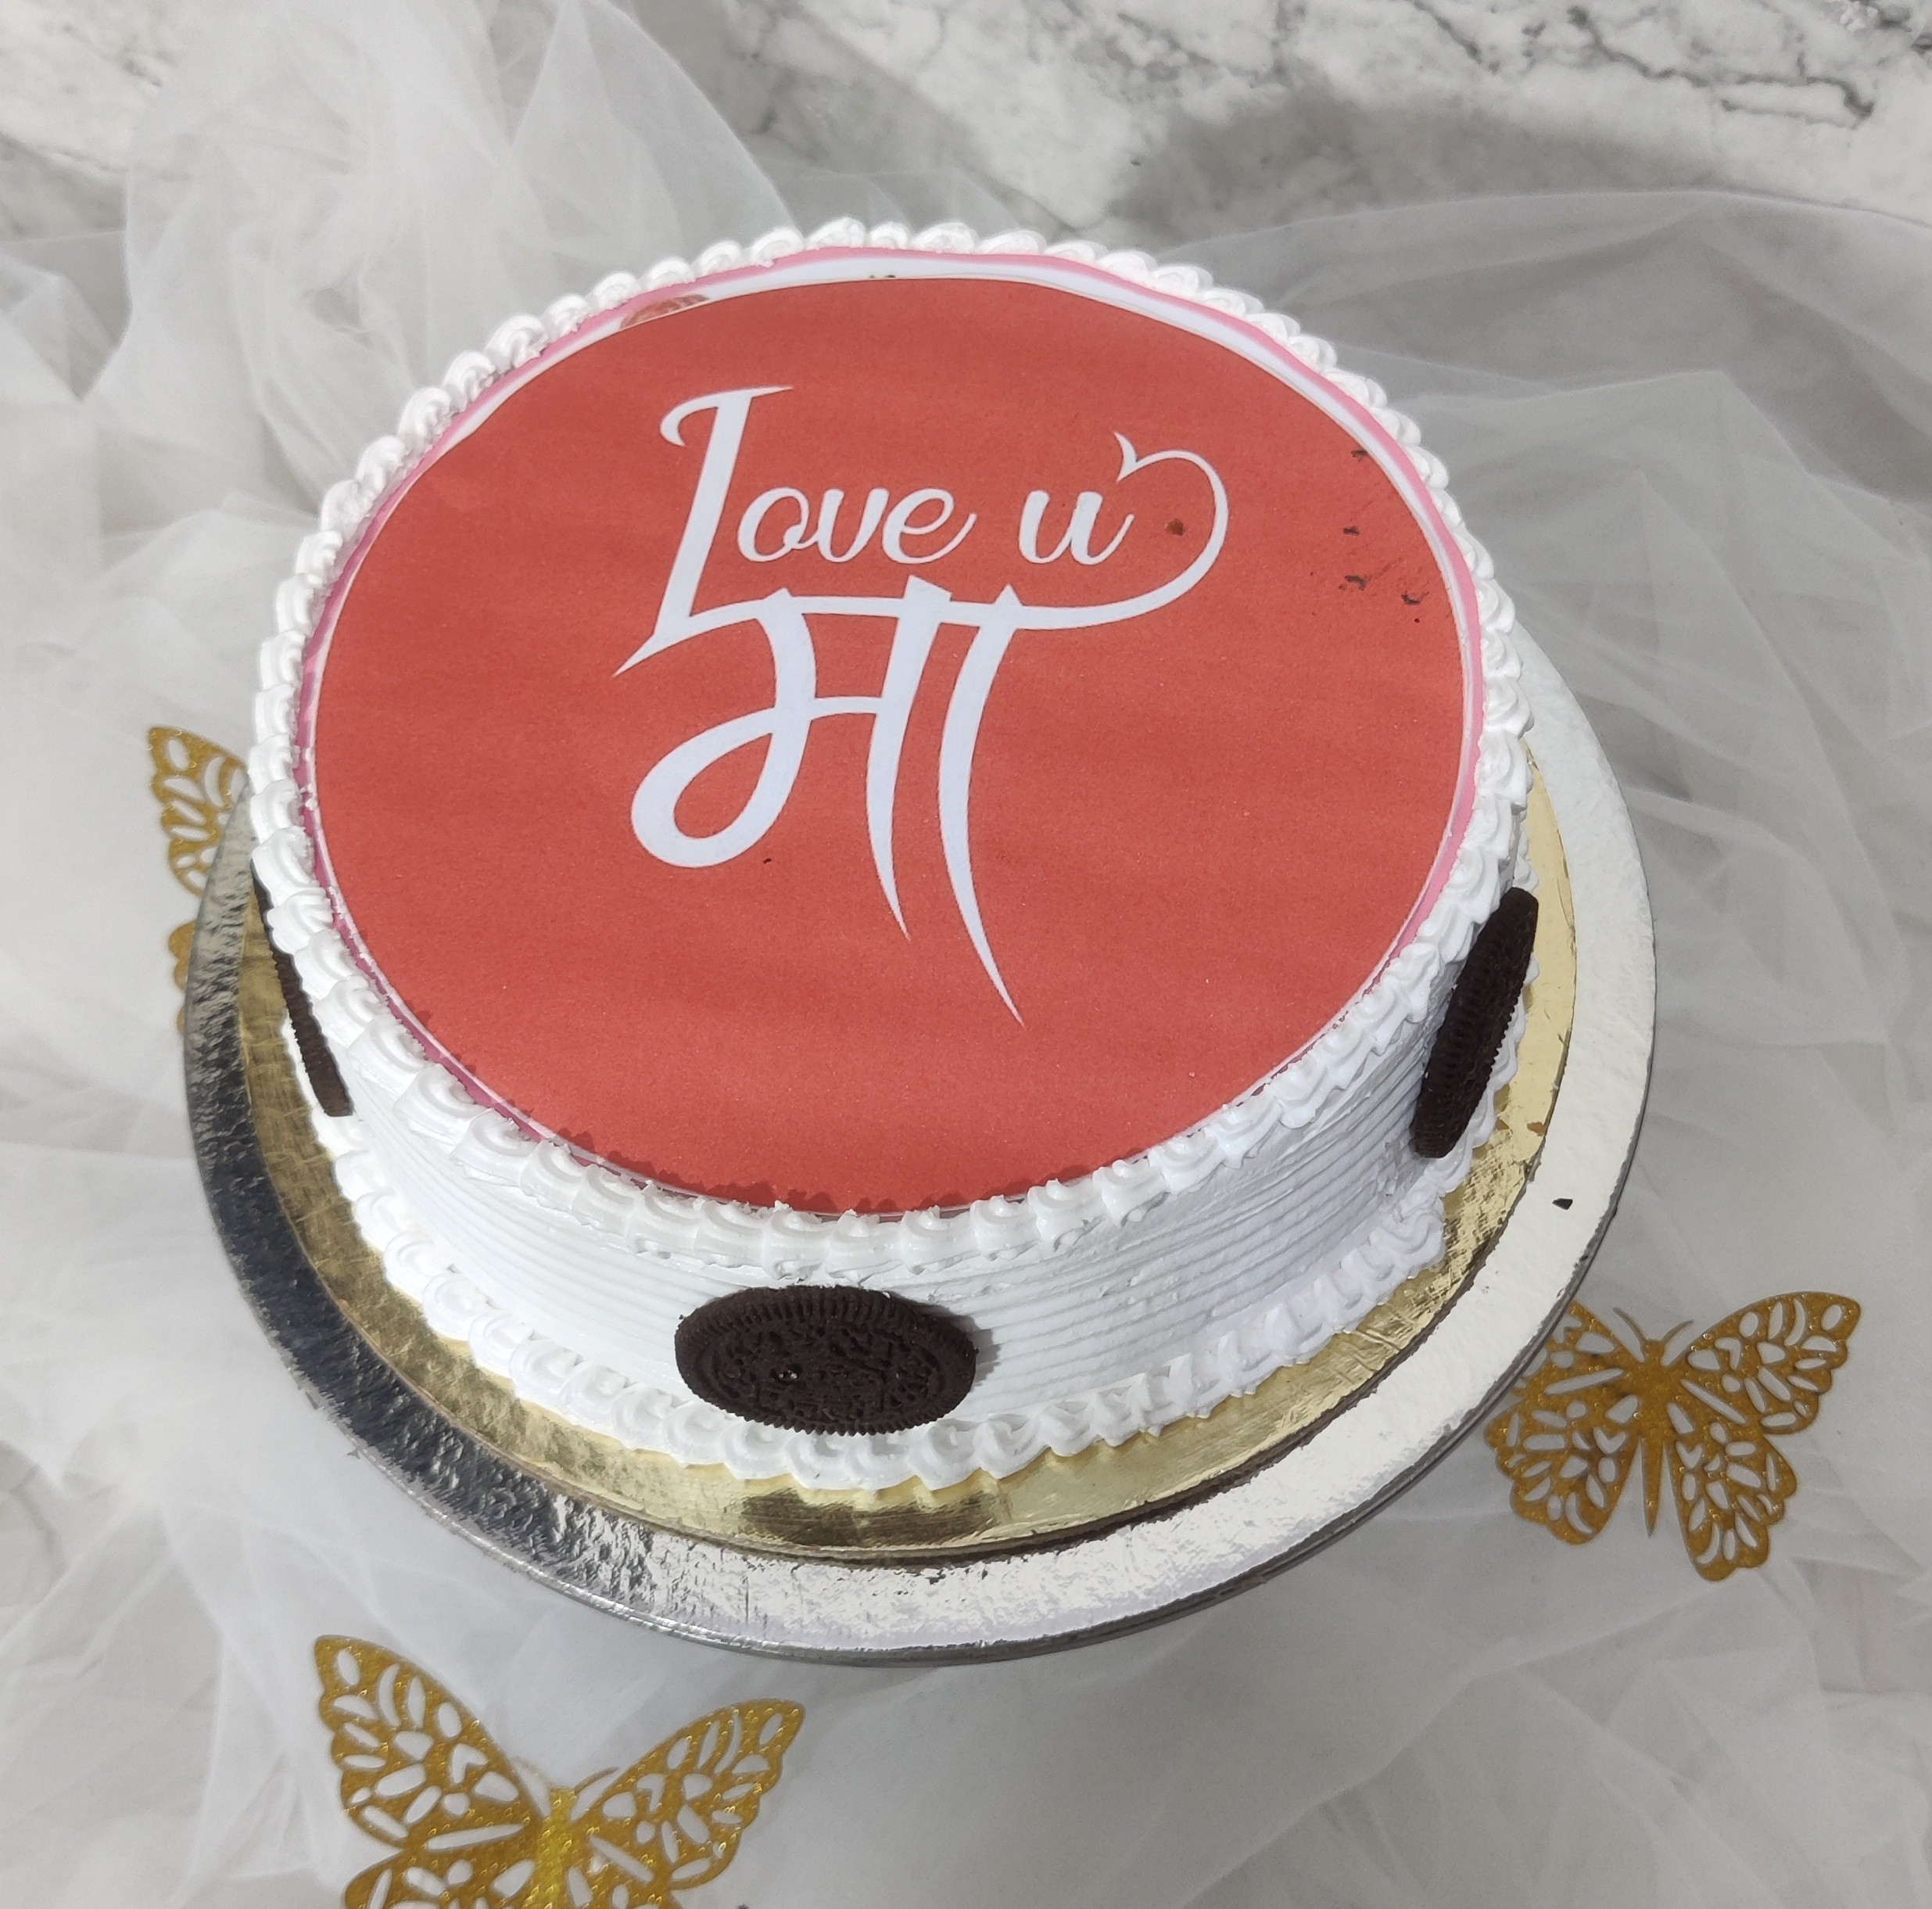 Theme Cakes - Born To Shop Theme Cake Manufacturer from Indore